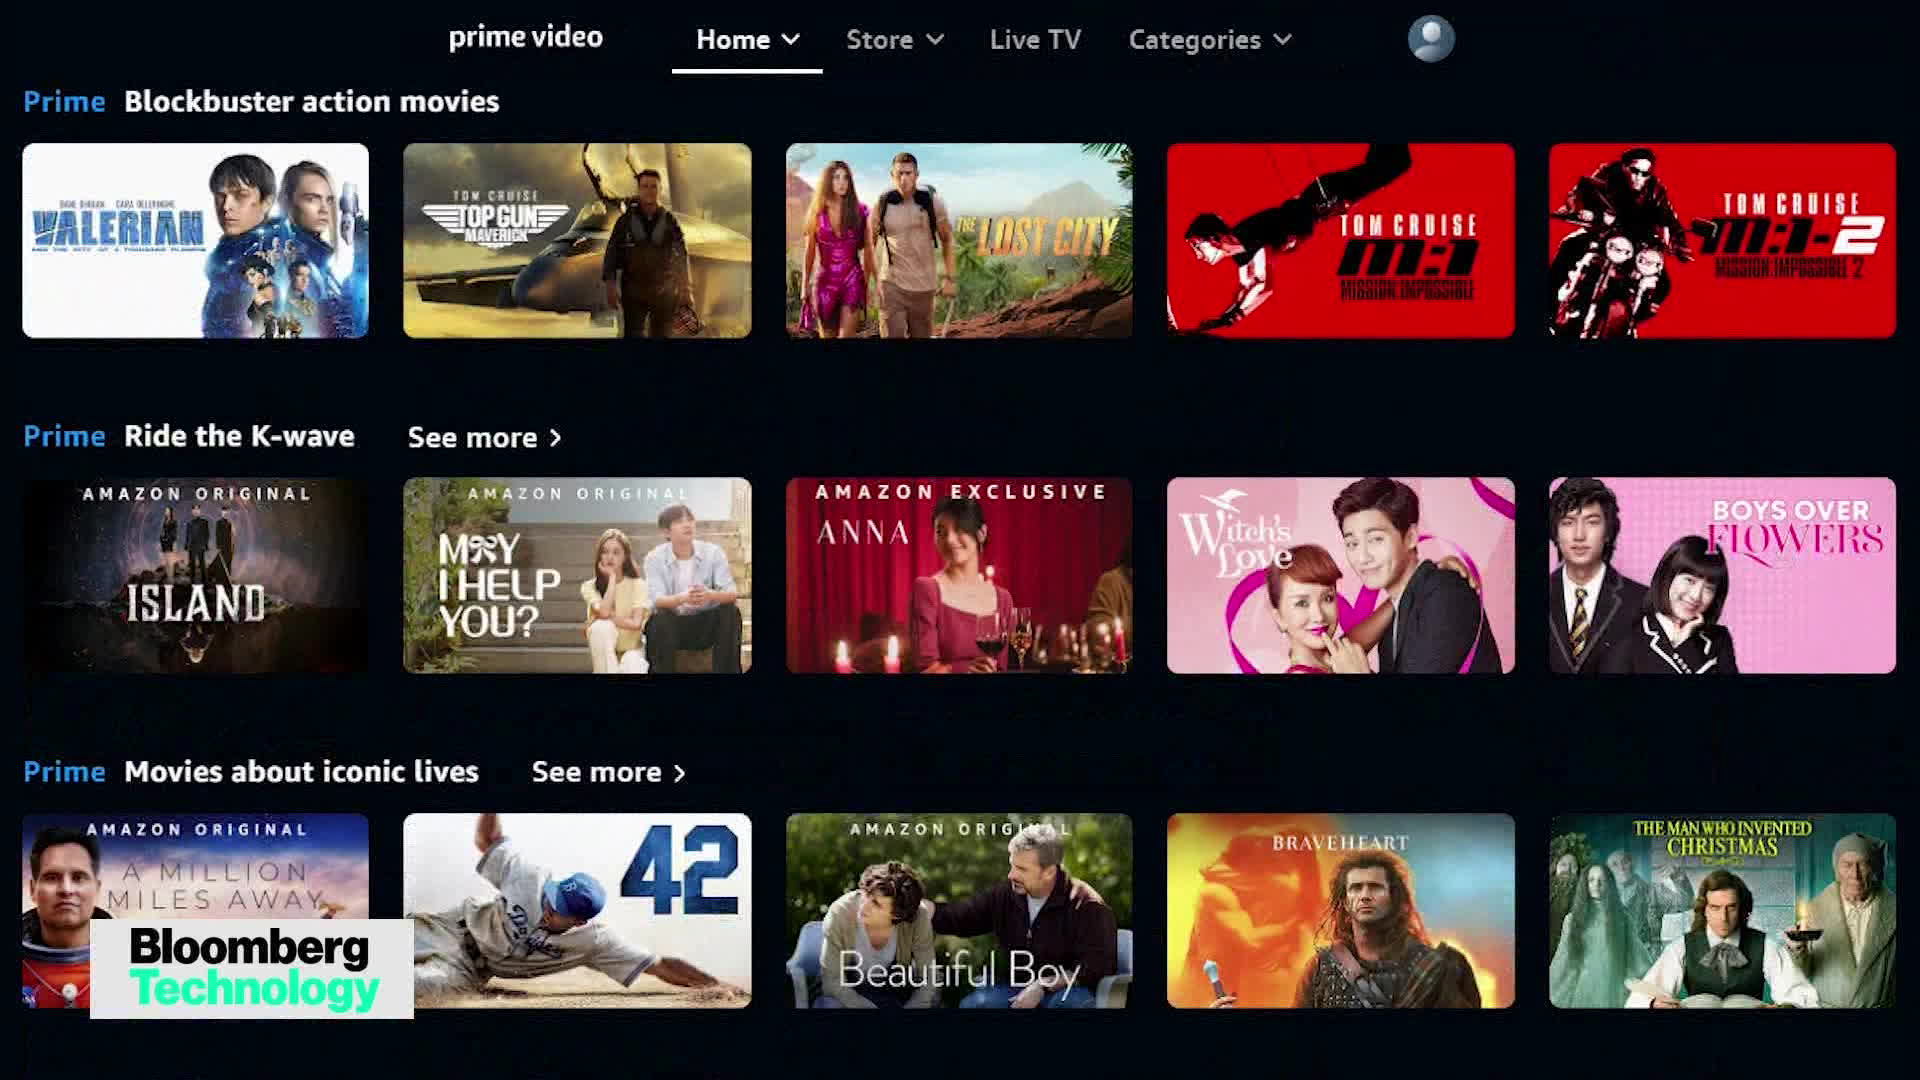 Wants Prime Video Users to Shop Via Ads - Bloomberg